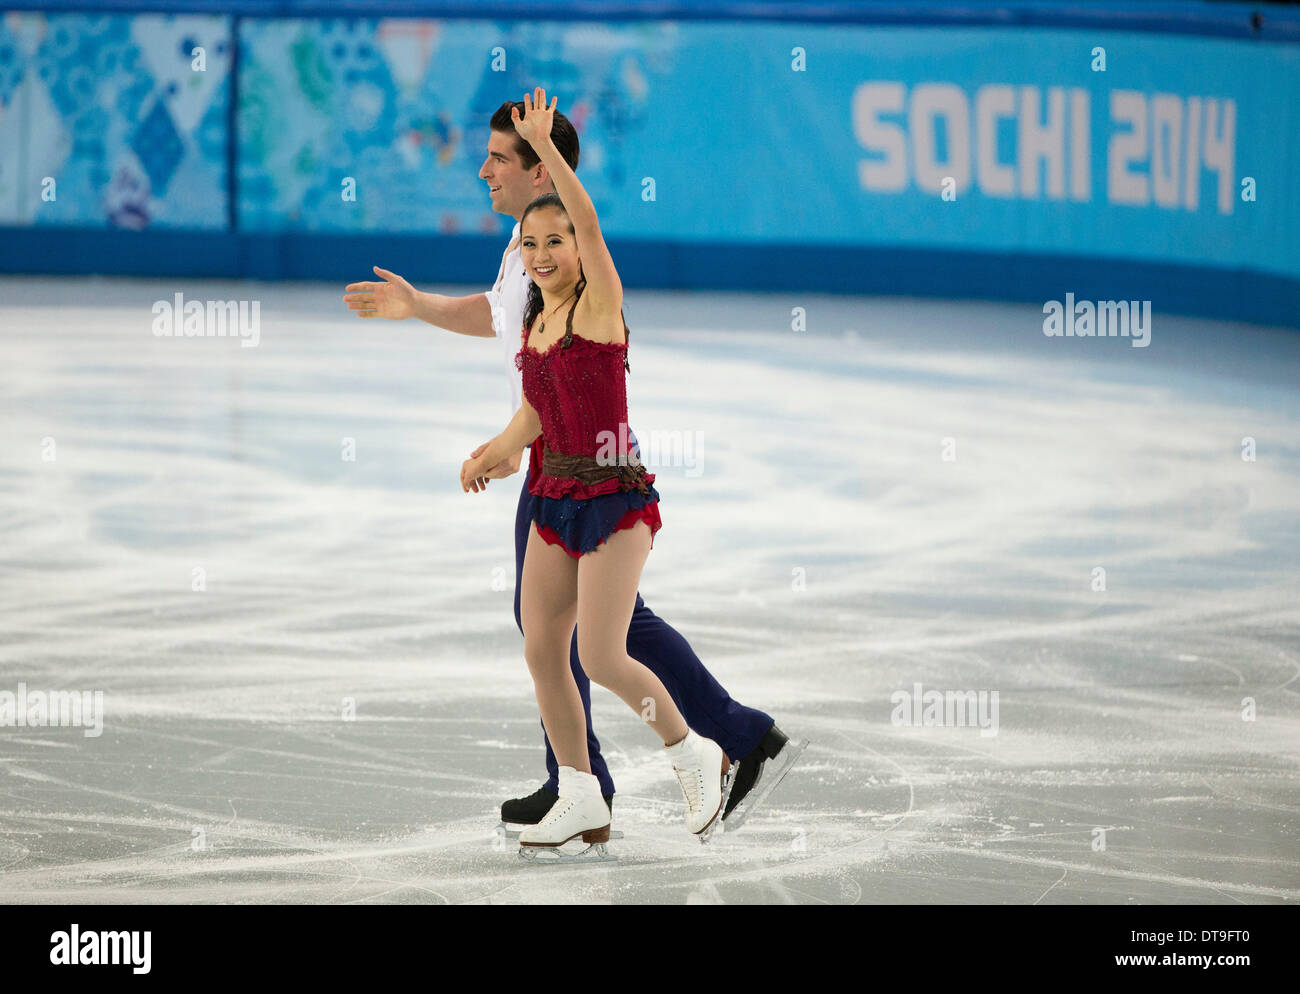 Sochi, Russia. 12th Feb, 2014. United States's Felicia Zhang and Nathan Bartholomay wave to audience after their routine during Team Pairs Free Skating at Iceberg Skating Palace during the 2014 Winter Olympics in Sochi. Credit:  Paul Kitagaki Jr./ZUMAPRESS.com/Alamy Live News Stock Photo